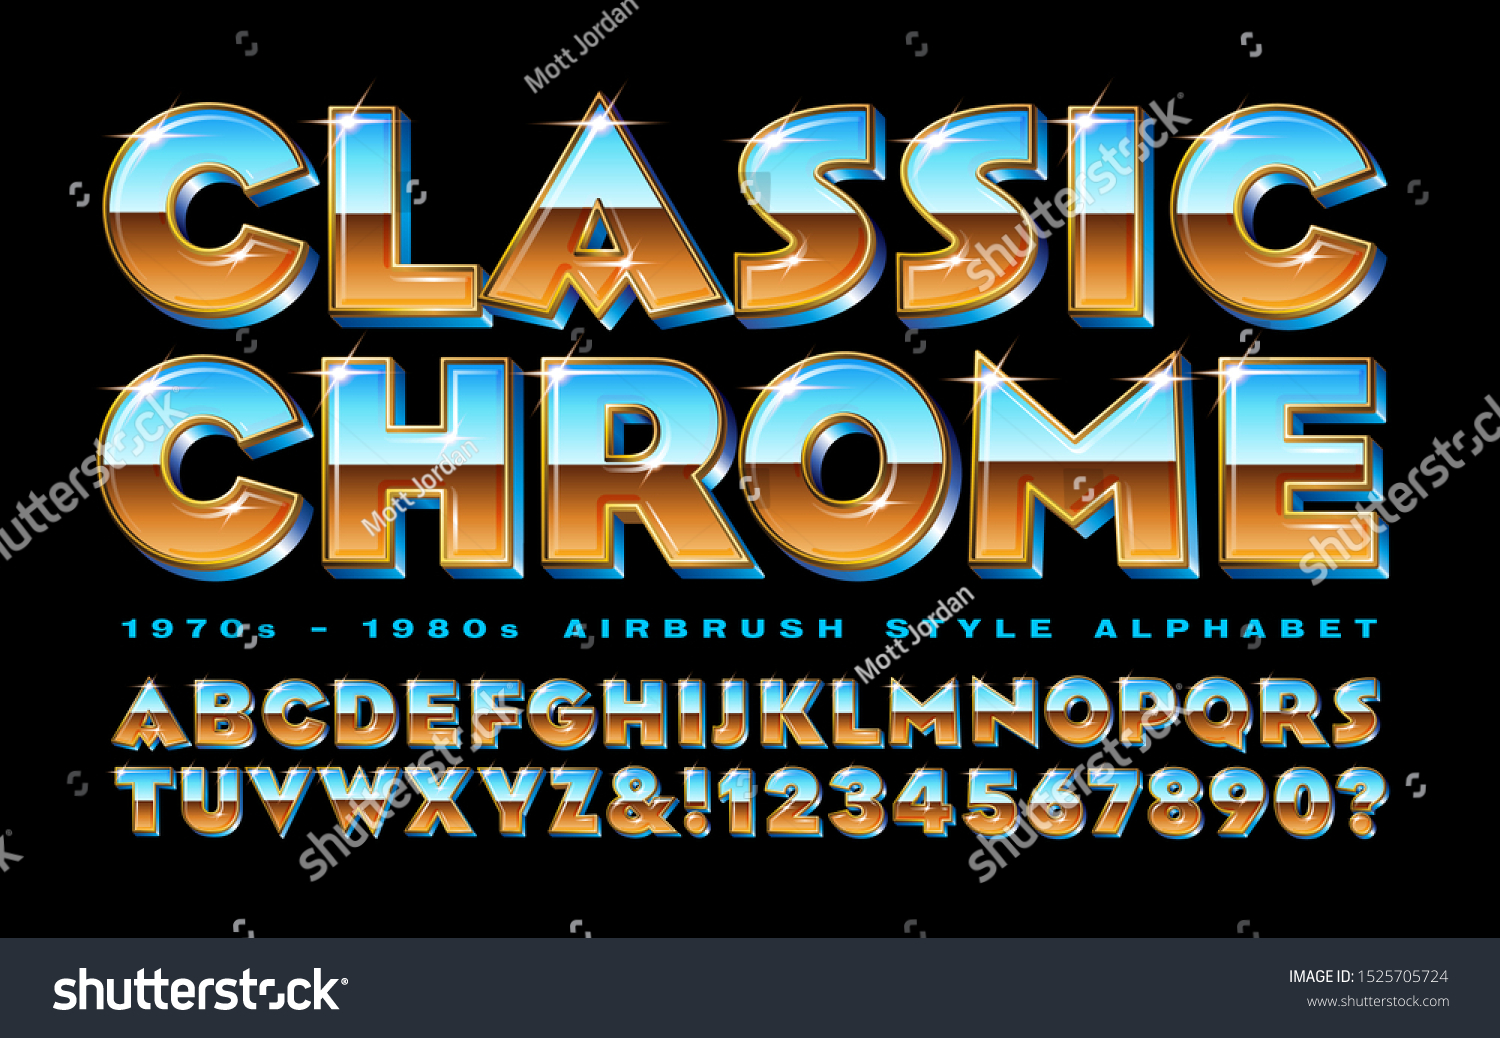 SVG of Vector alphabet of vintage style chrome lettering in a 1970s or 1980s airbrush style font. svg